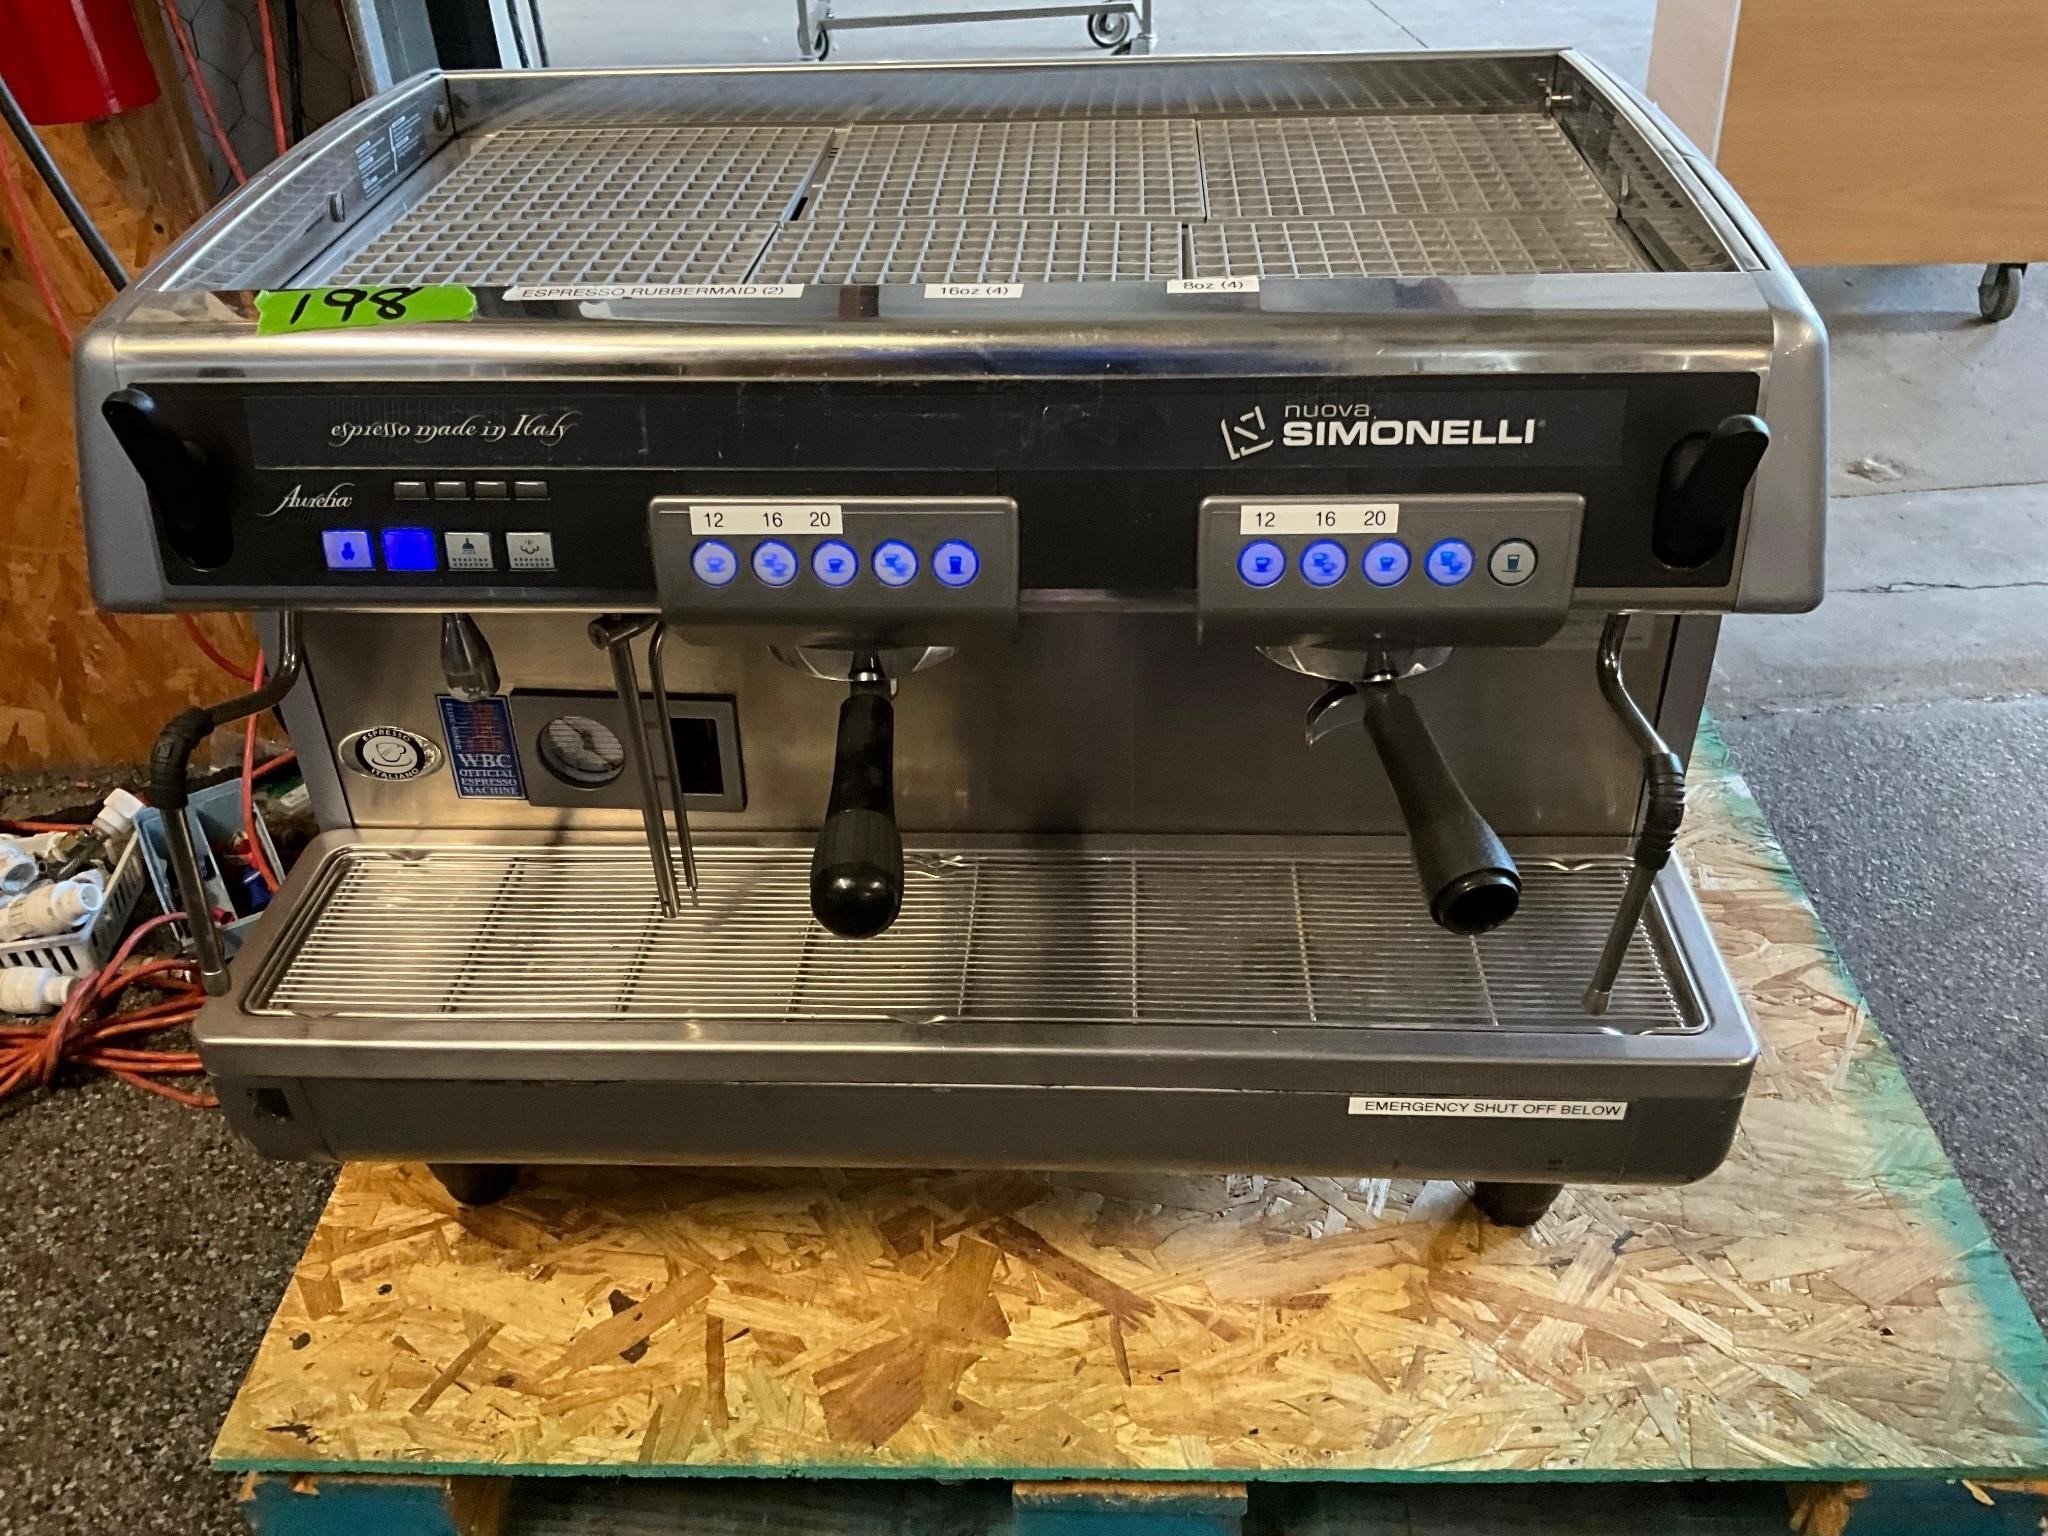 July 10th Restaurant and Bakery Equipment Auction